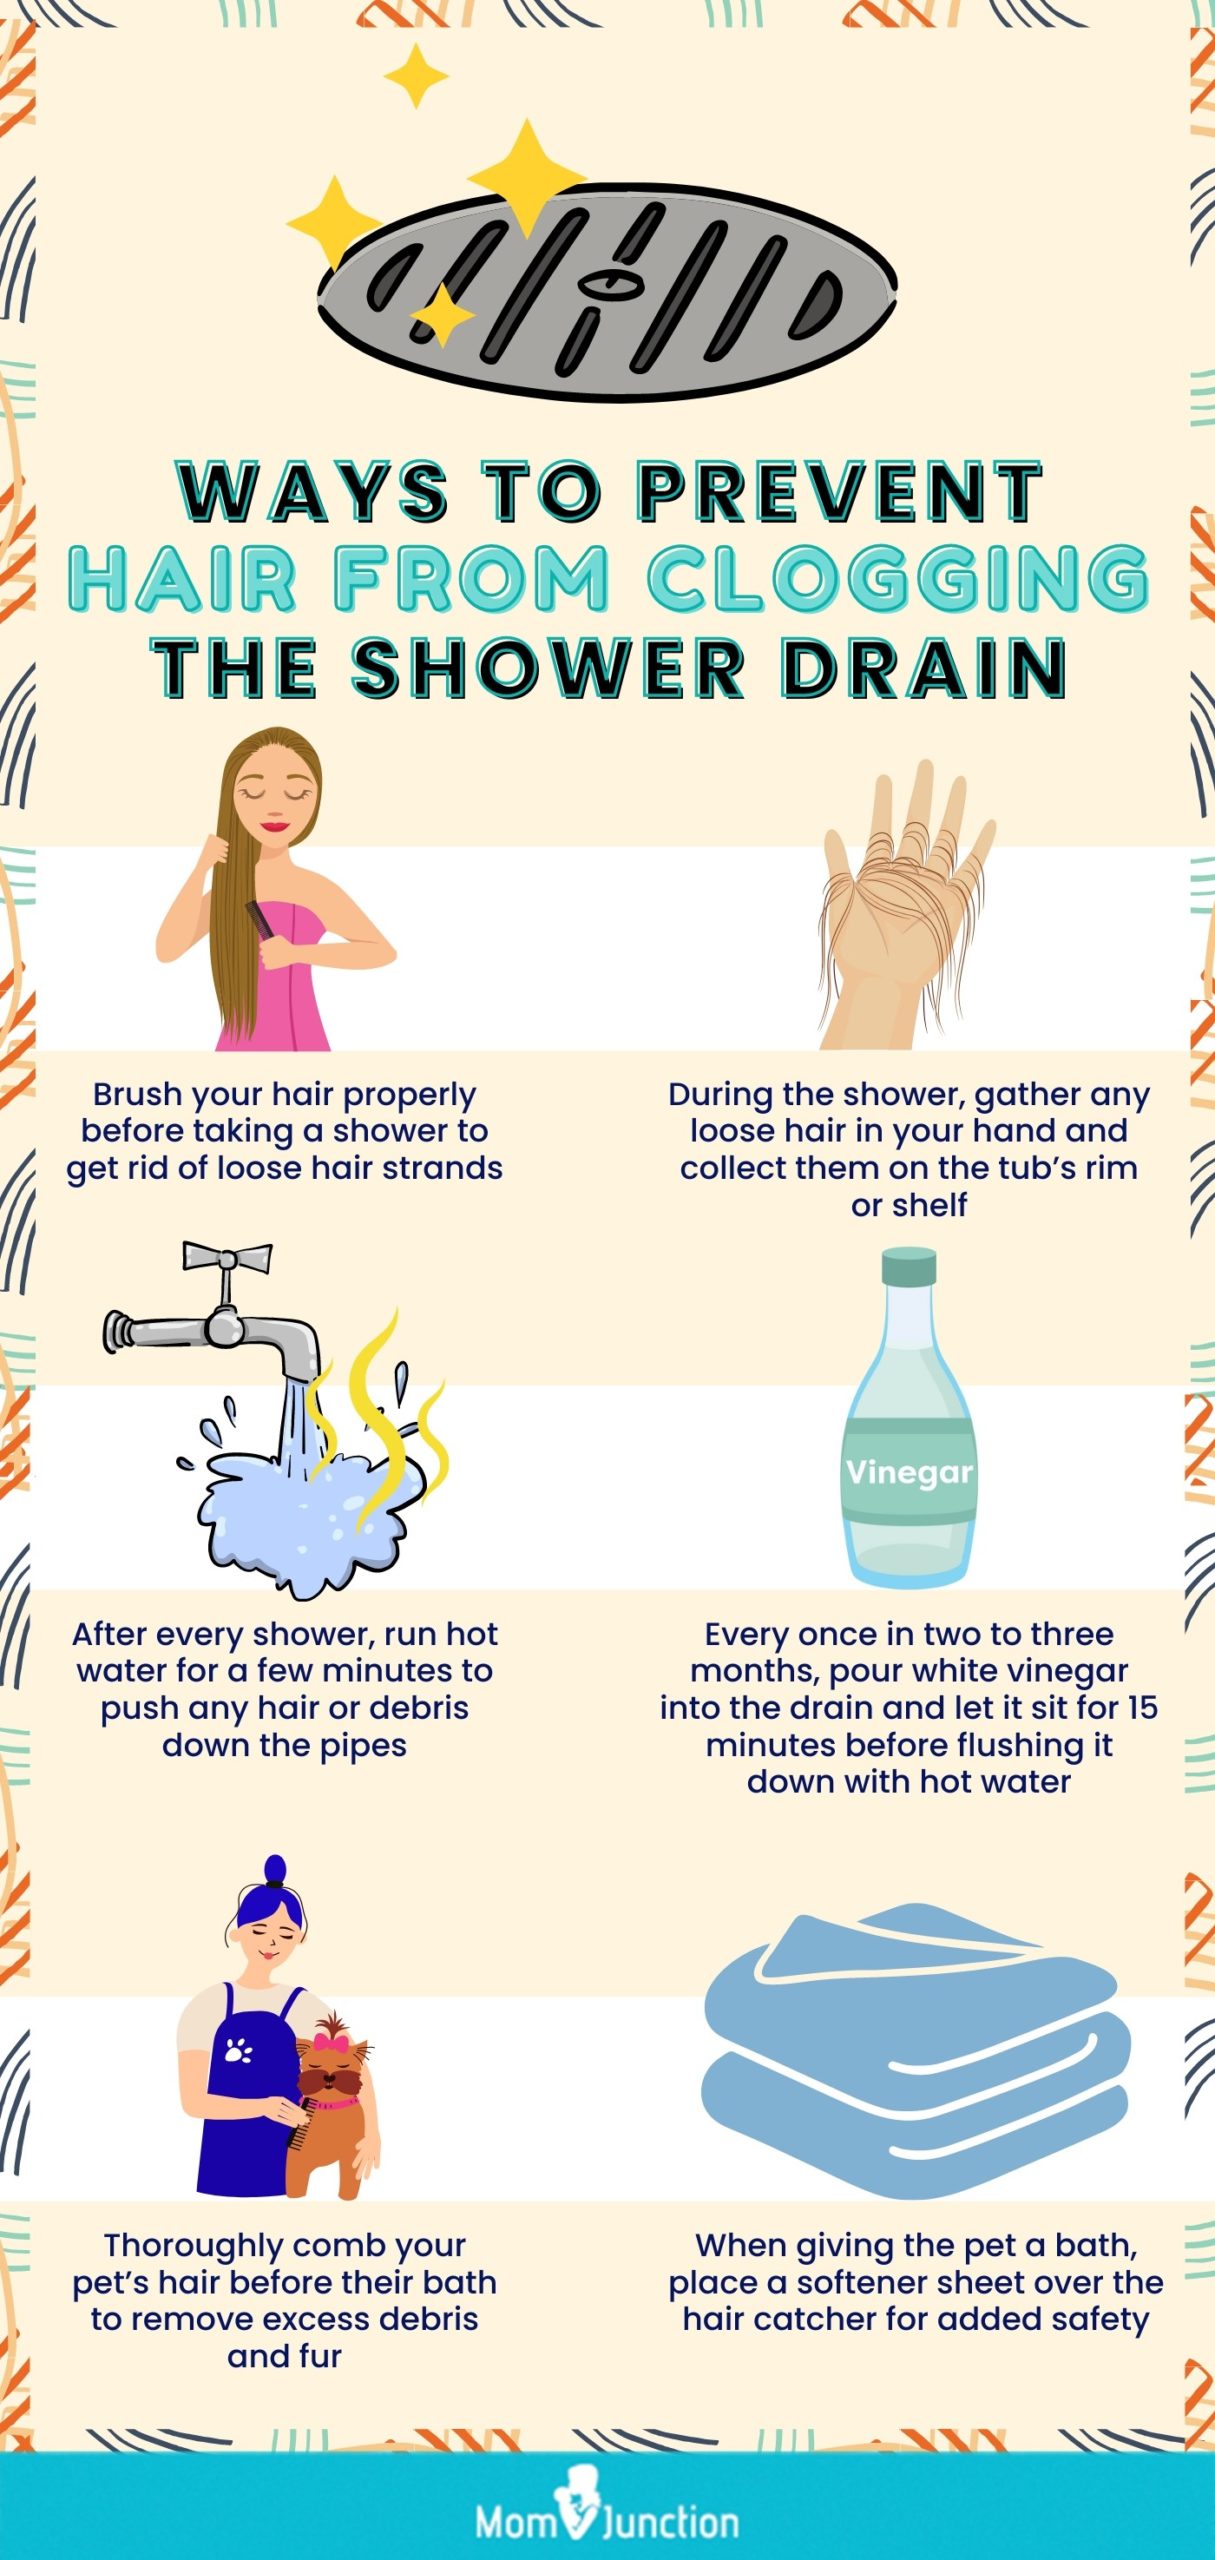 https://www.momjunction.com/wp-content/uploads/2023/01/Ways-To-Prevent-Hair-From-Clogging-The-Shower-Drain-scaled.jpg